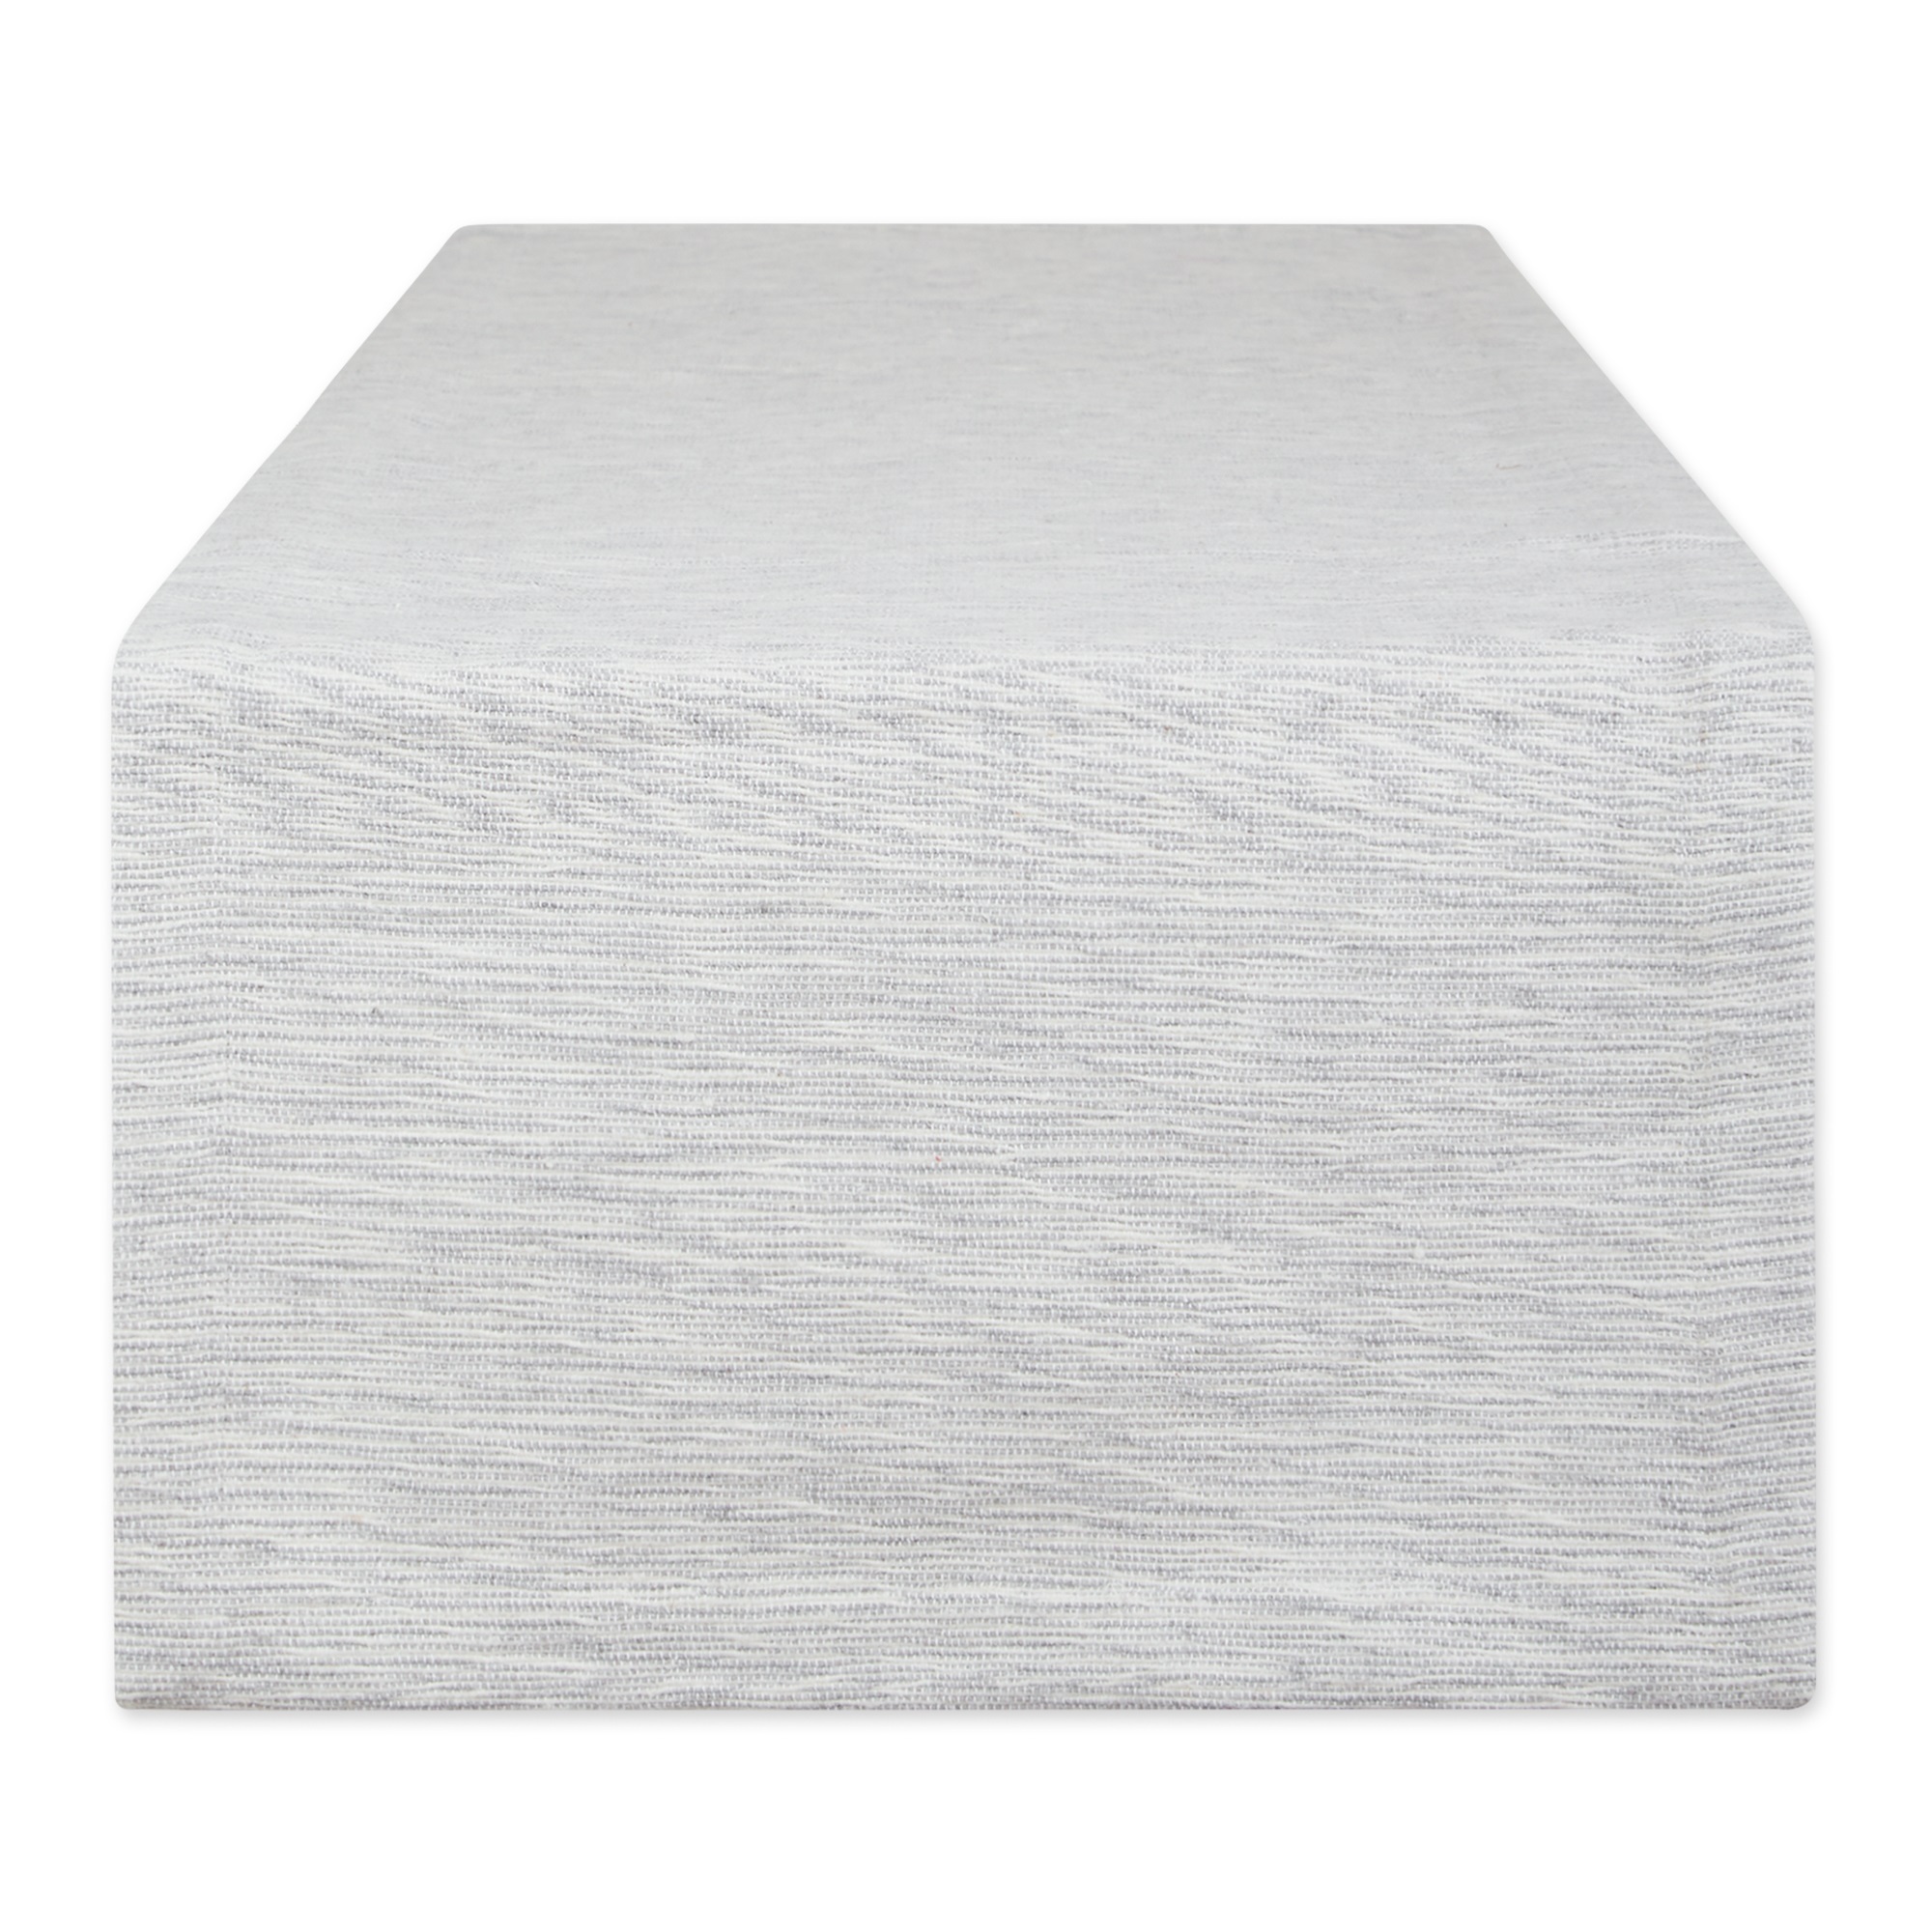 EL: TEXTILES LIGHT GRAY AND OFF-WHITE TONAL RECYCLED COTTON SLUBBY RIB TABLE RUNNER 14x72